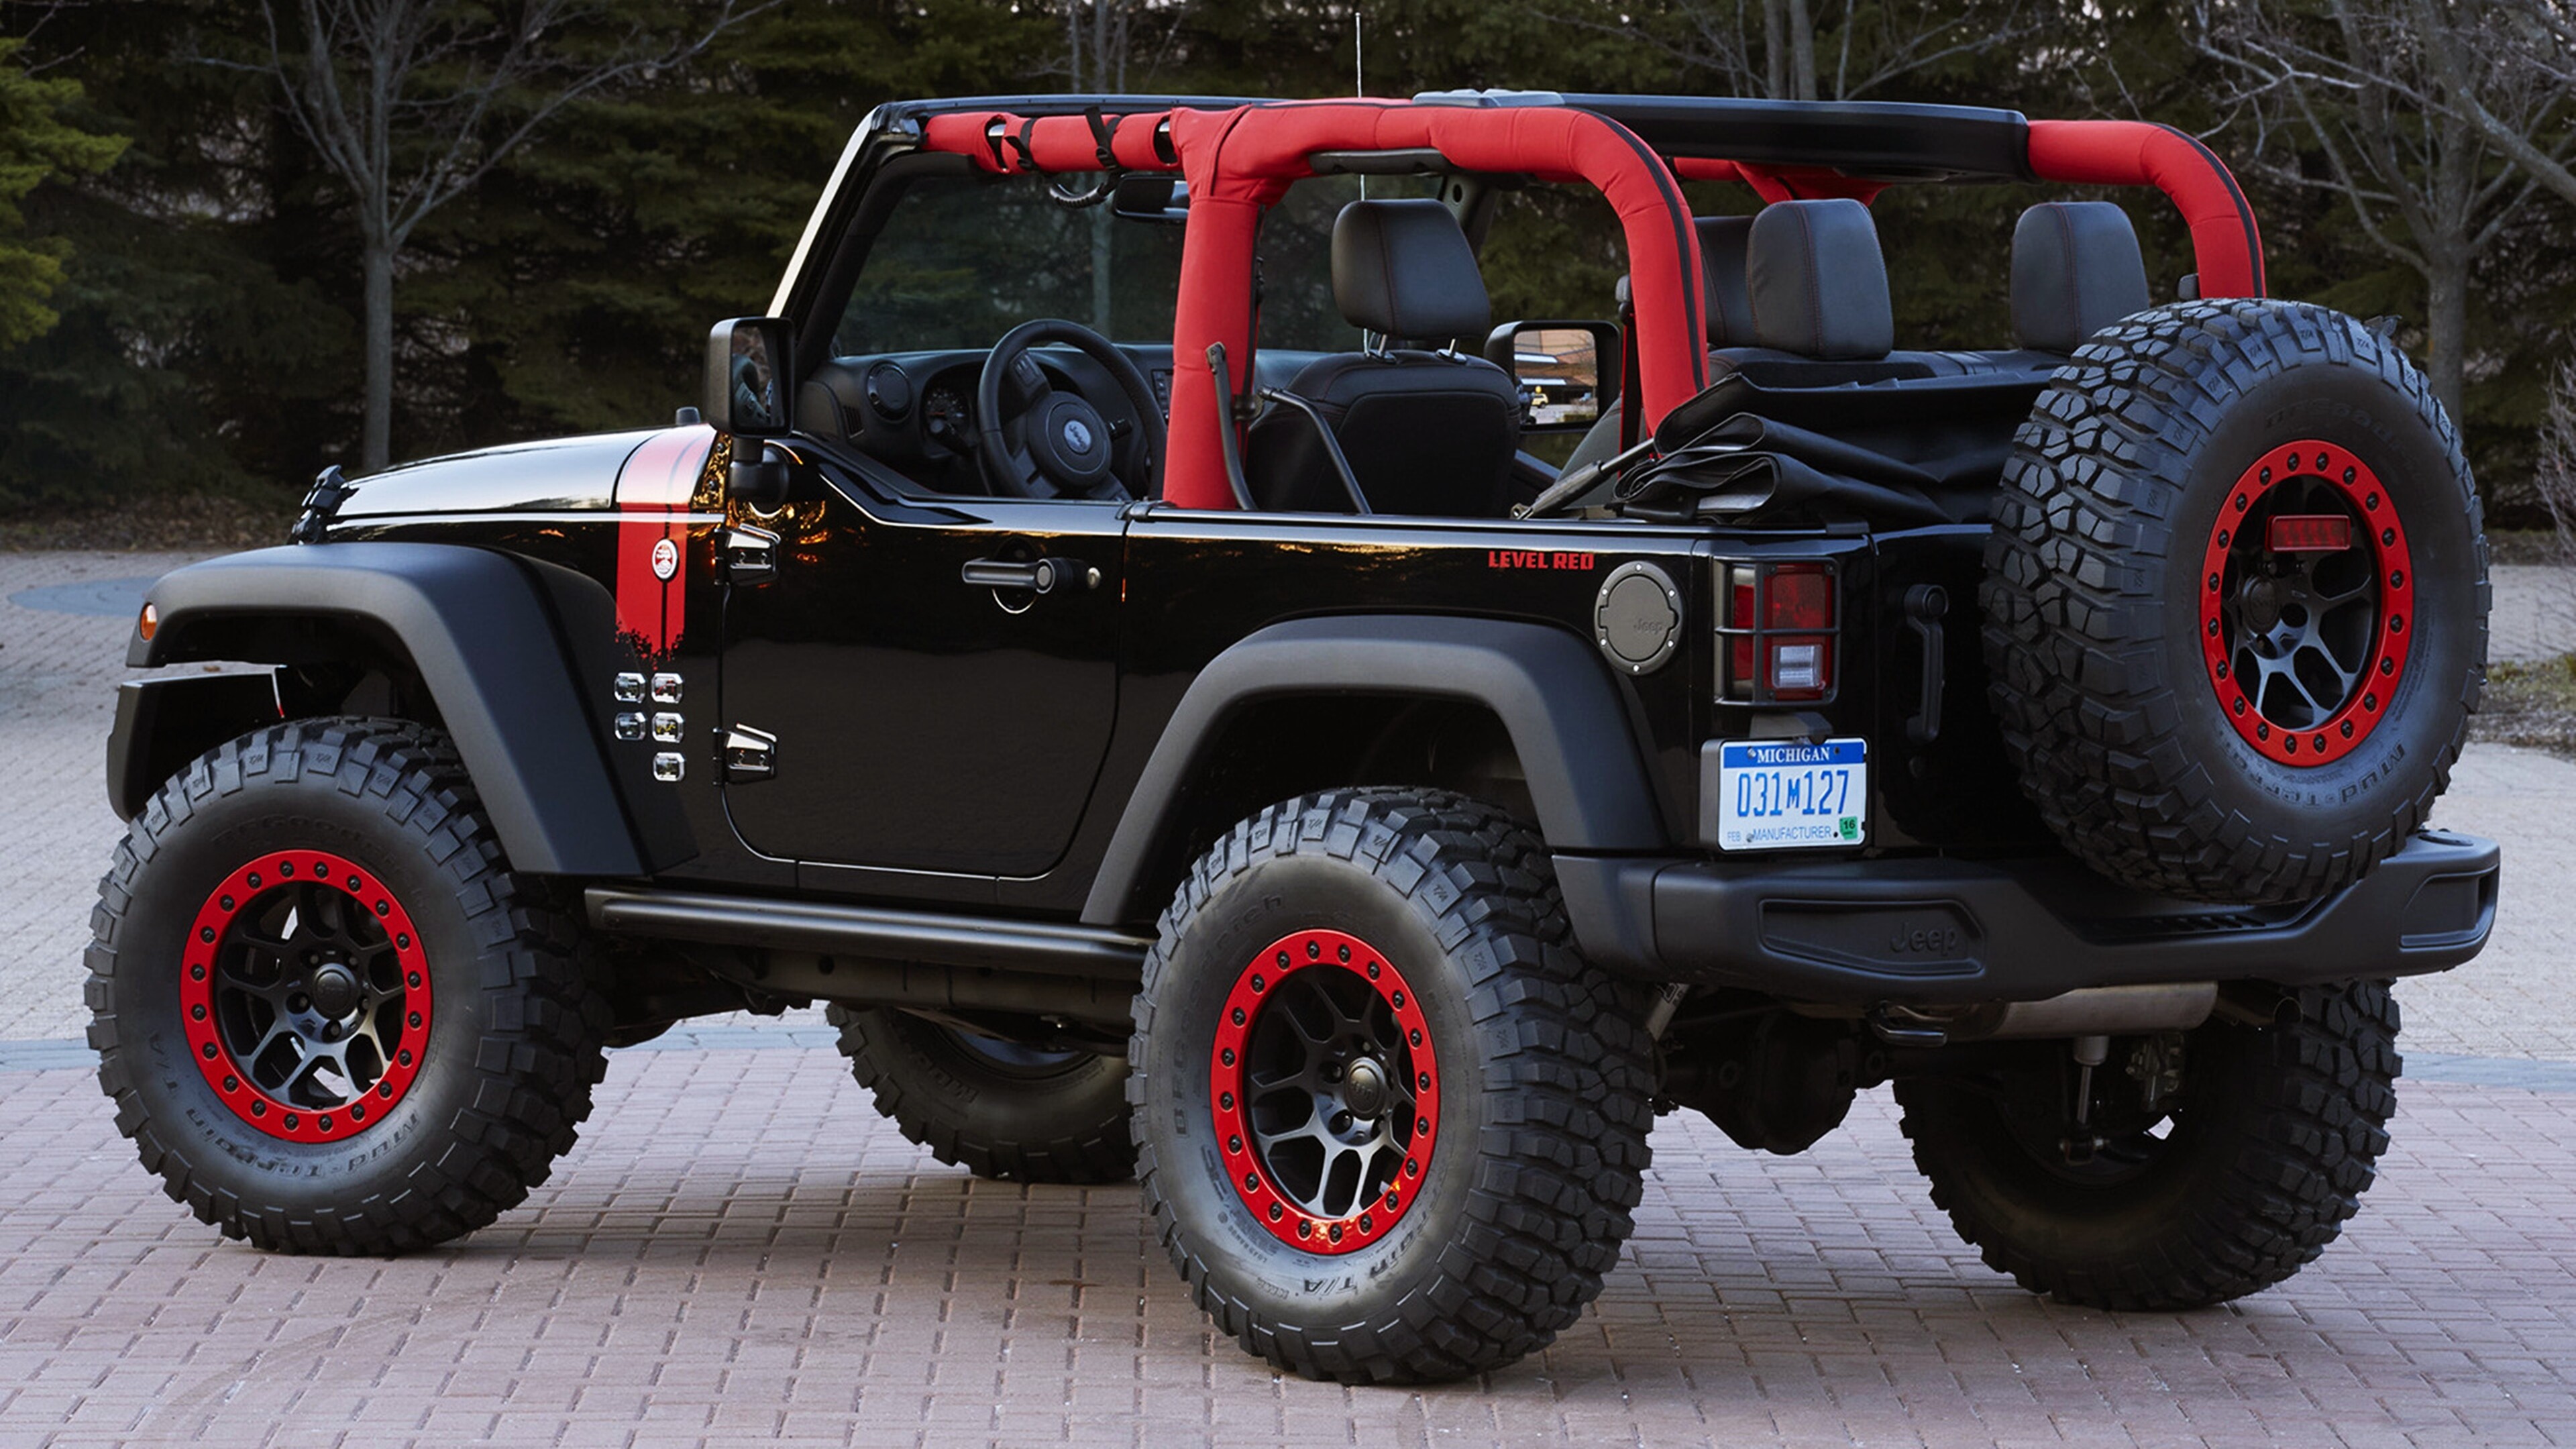 Jeep Wrangler: The model is a direct progression from the World War II CJ produced by Willys. 3840x2160 4K Background.